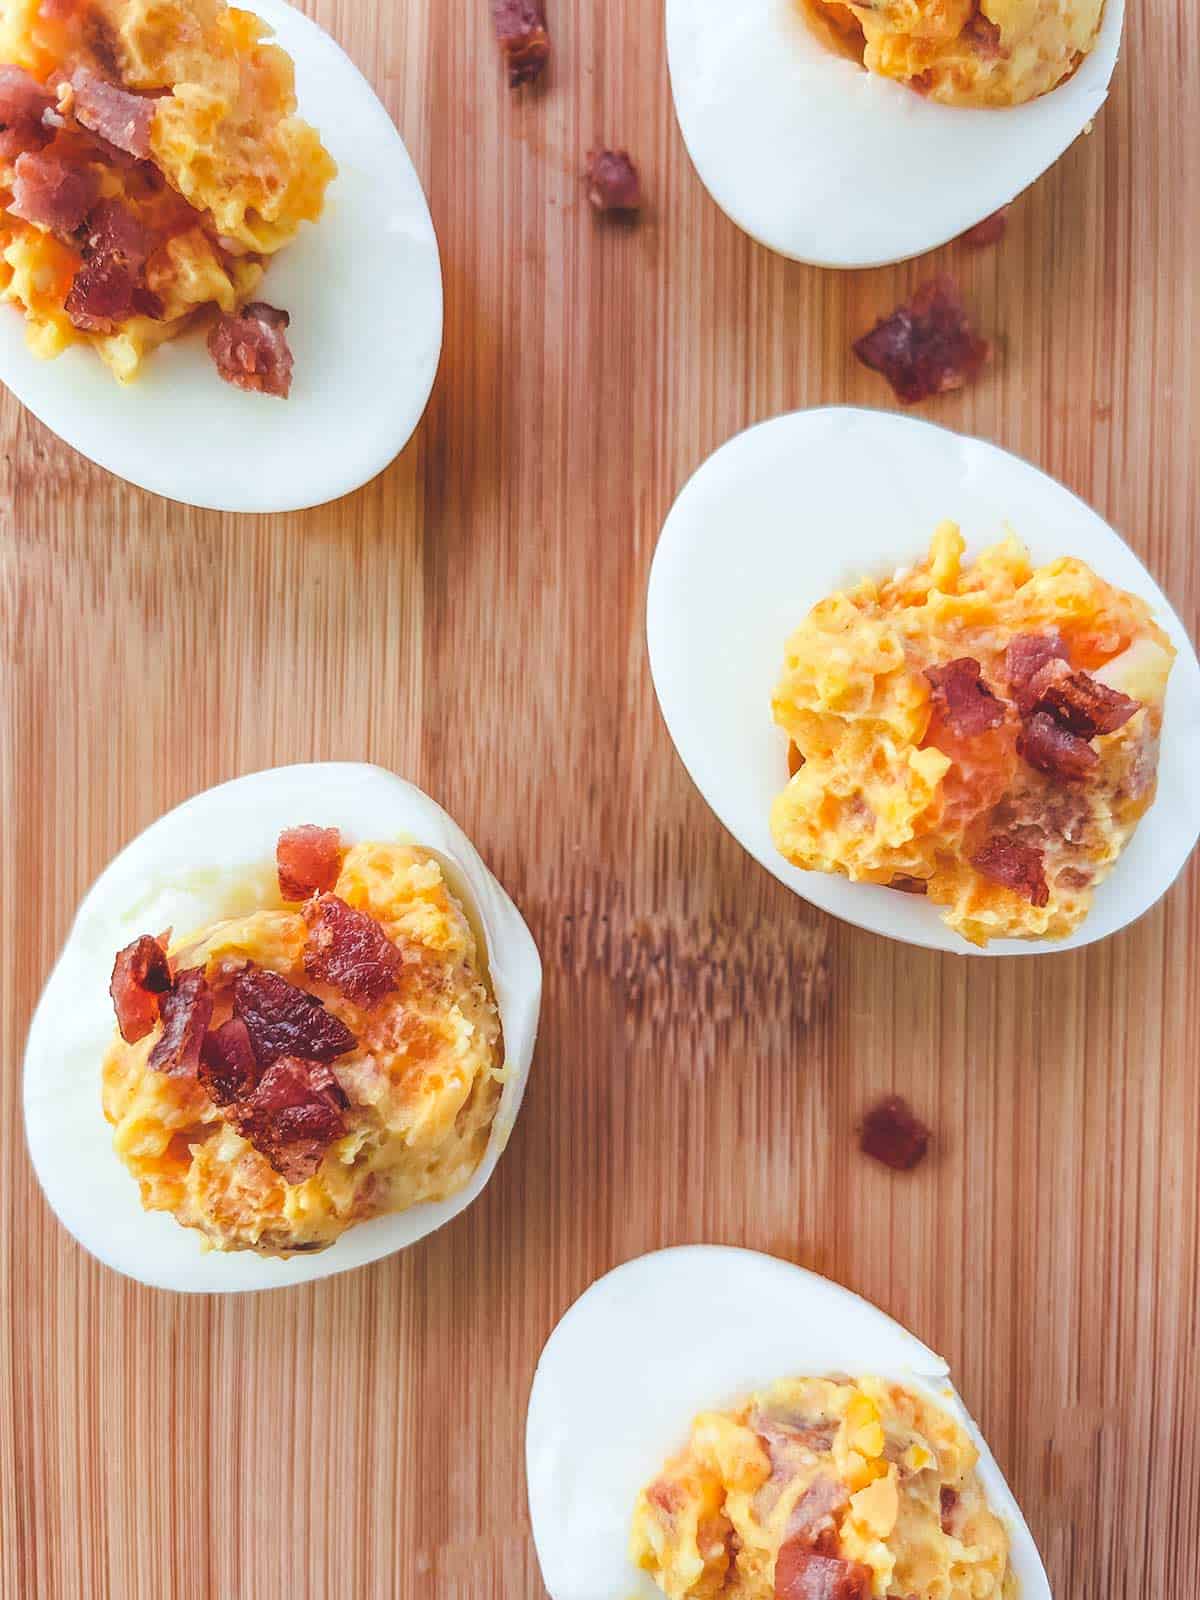 5 cheese and bacon stuffed eggs on a wooden board.